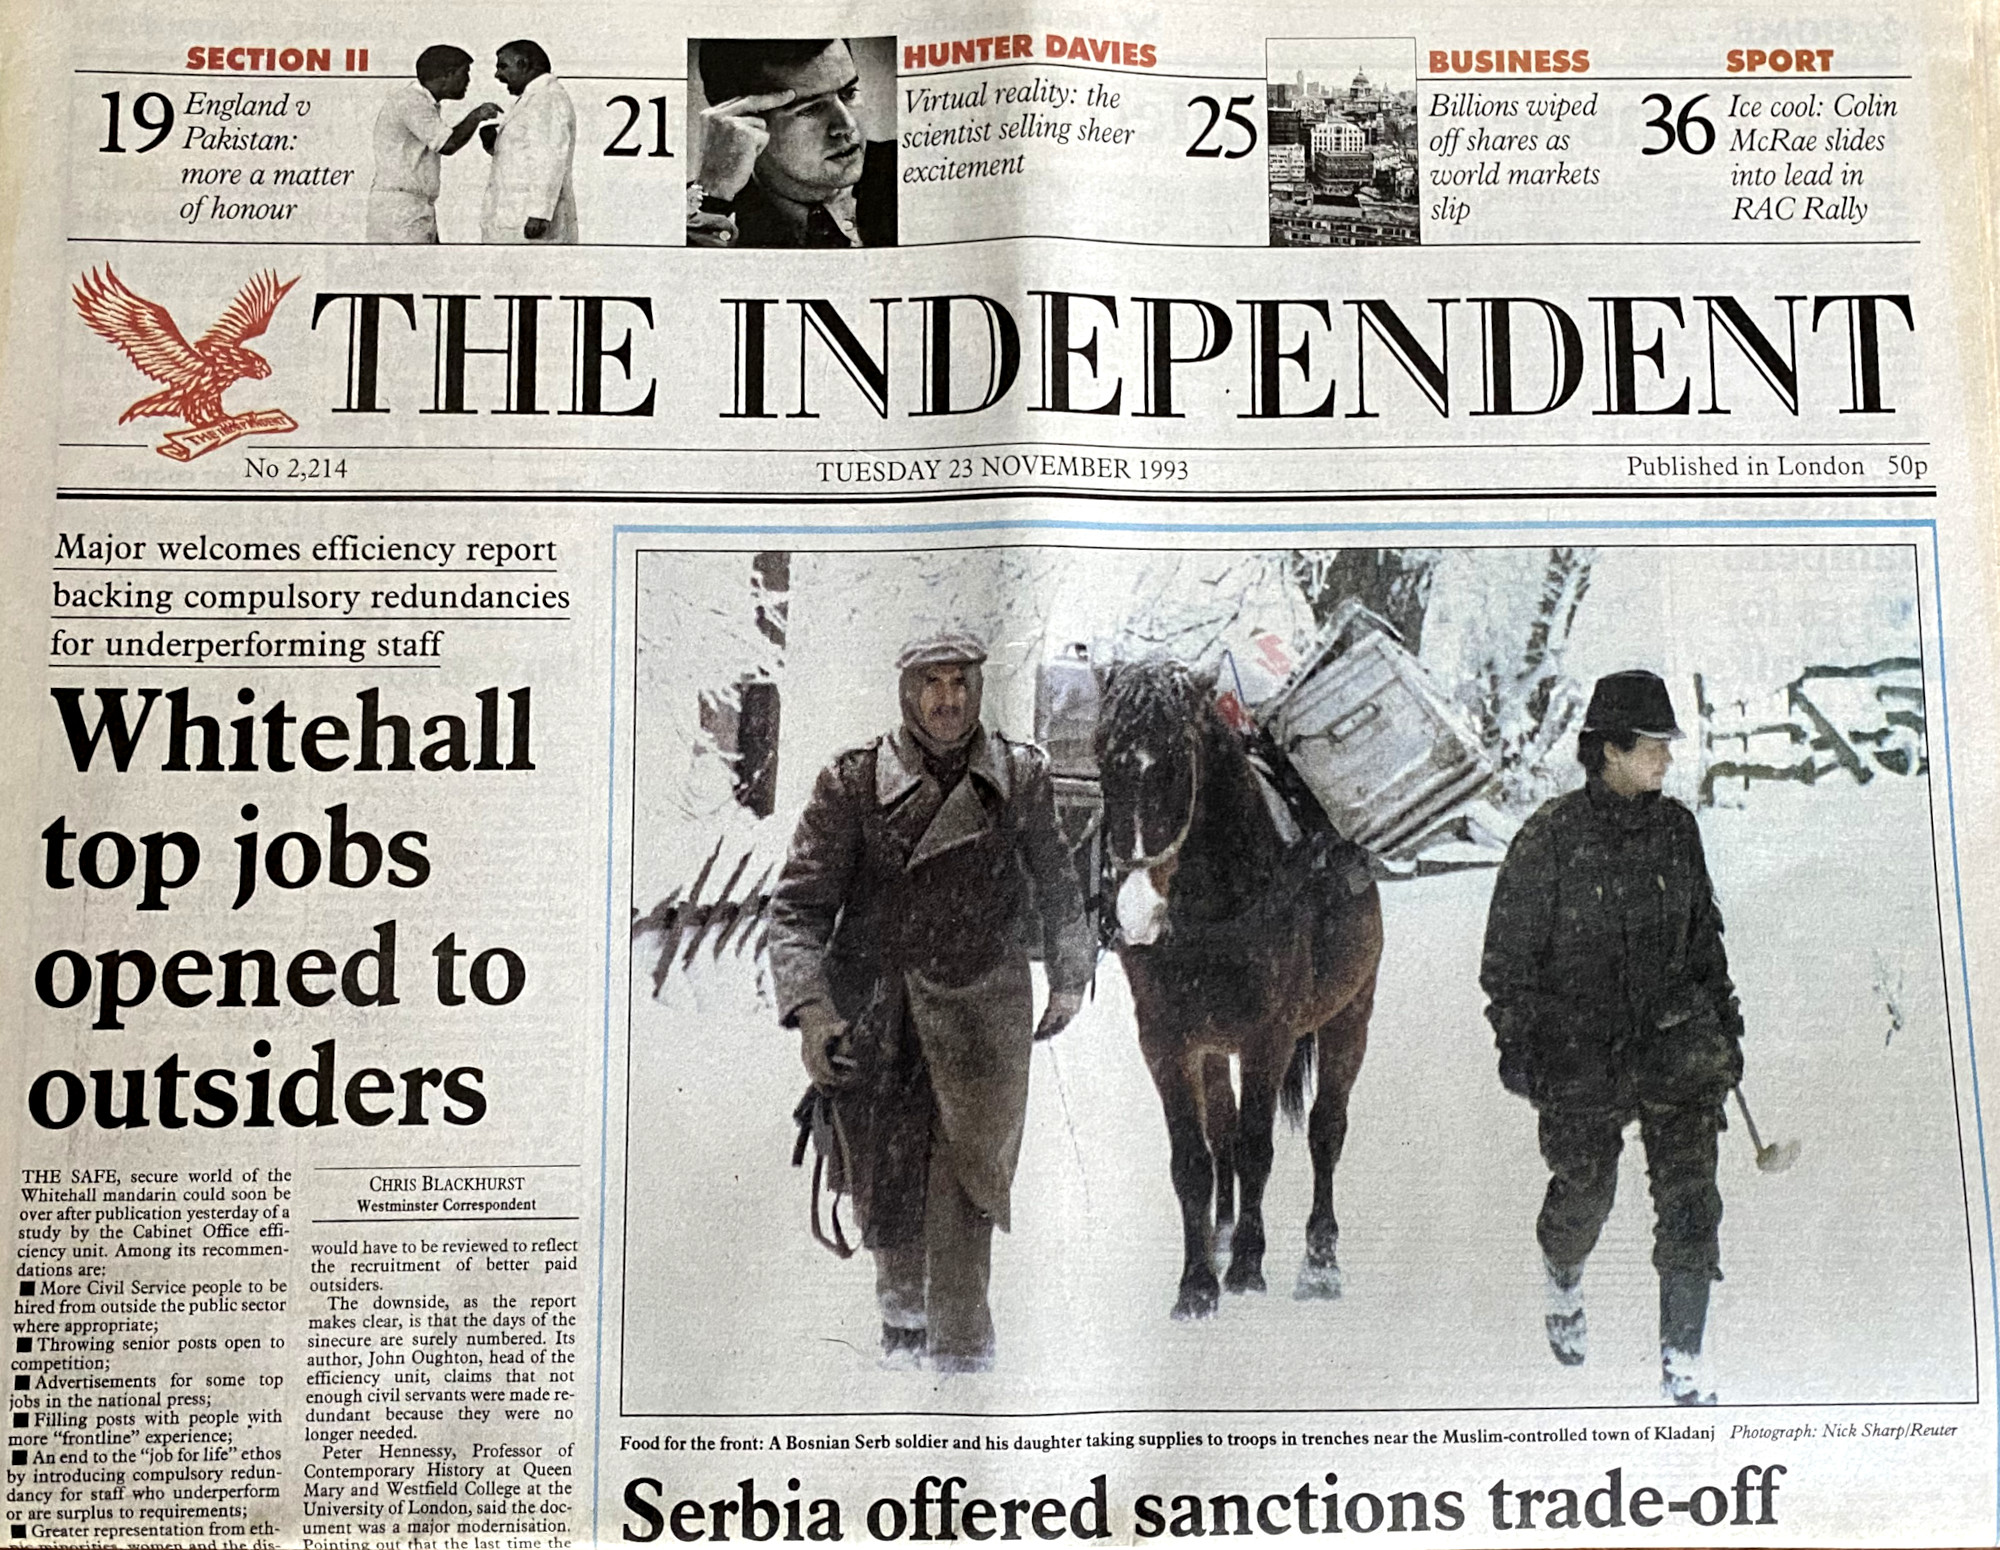 Front page of The Independent 23/11/93 - top headline Whitehall top jobs opened to outsiders